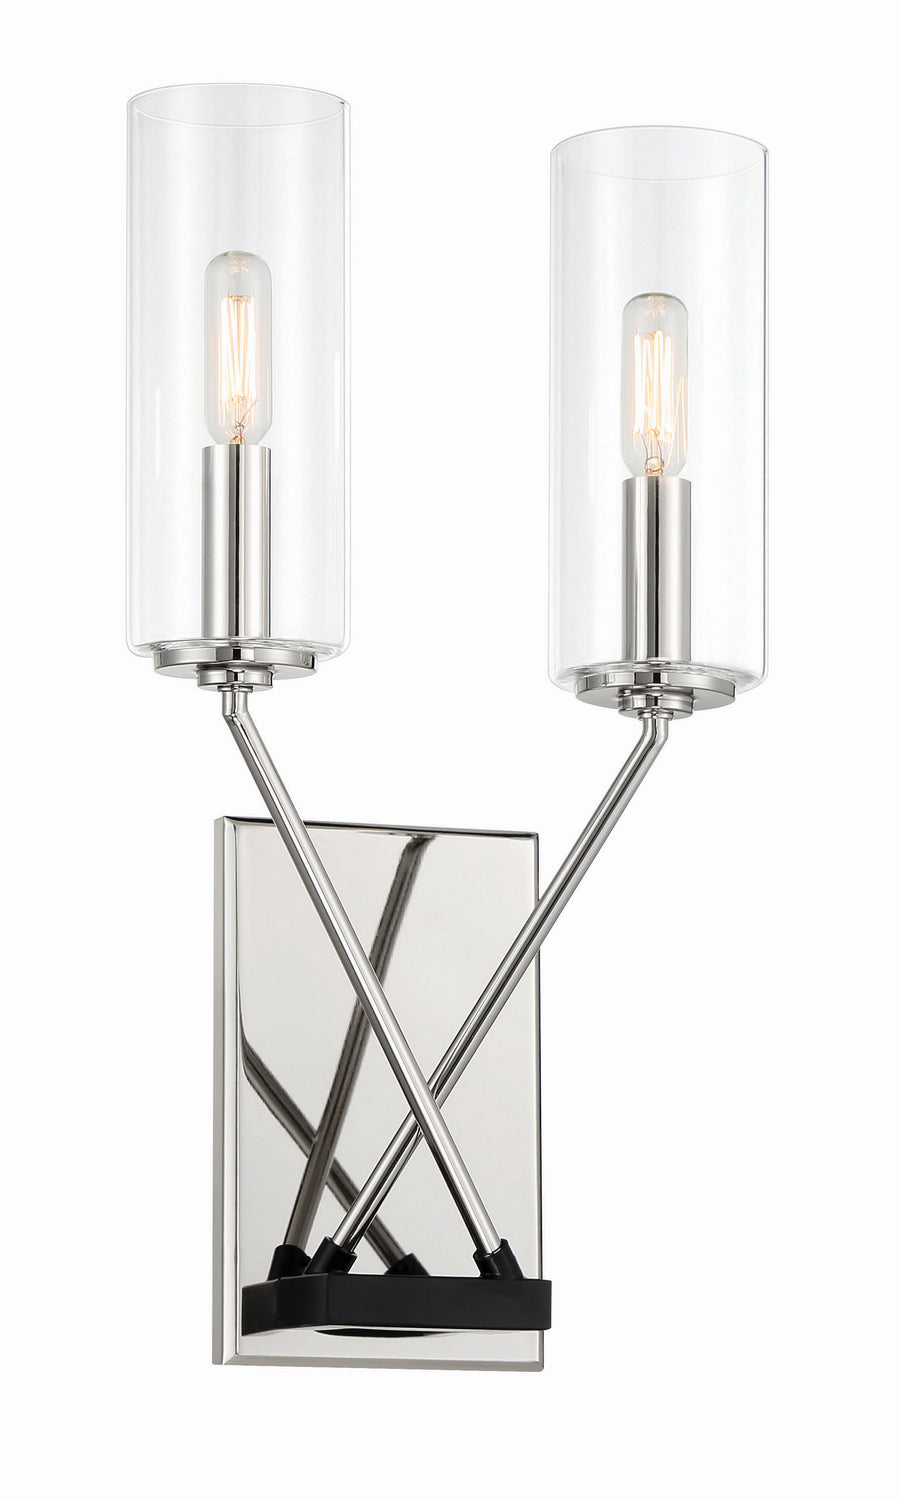 Highland Crossing Two Light Wall Sconce in Coal with Polished Nickel Highlights - Lamps Expo